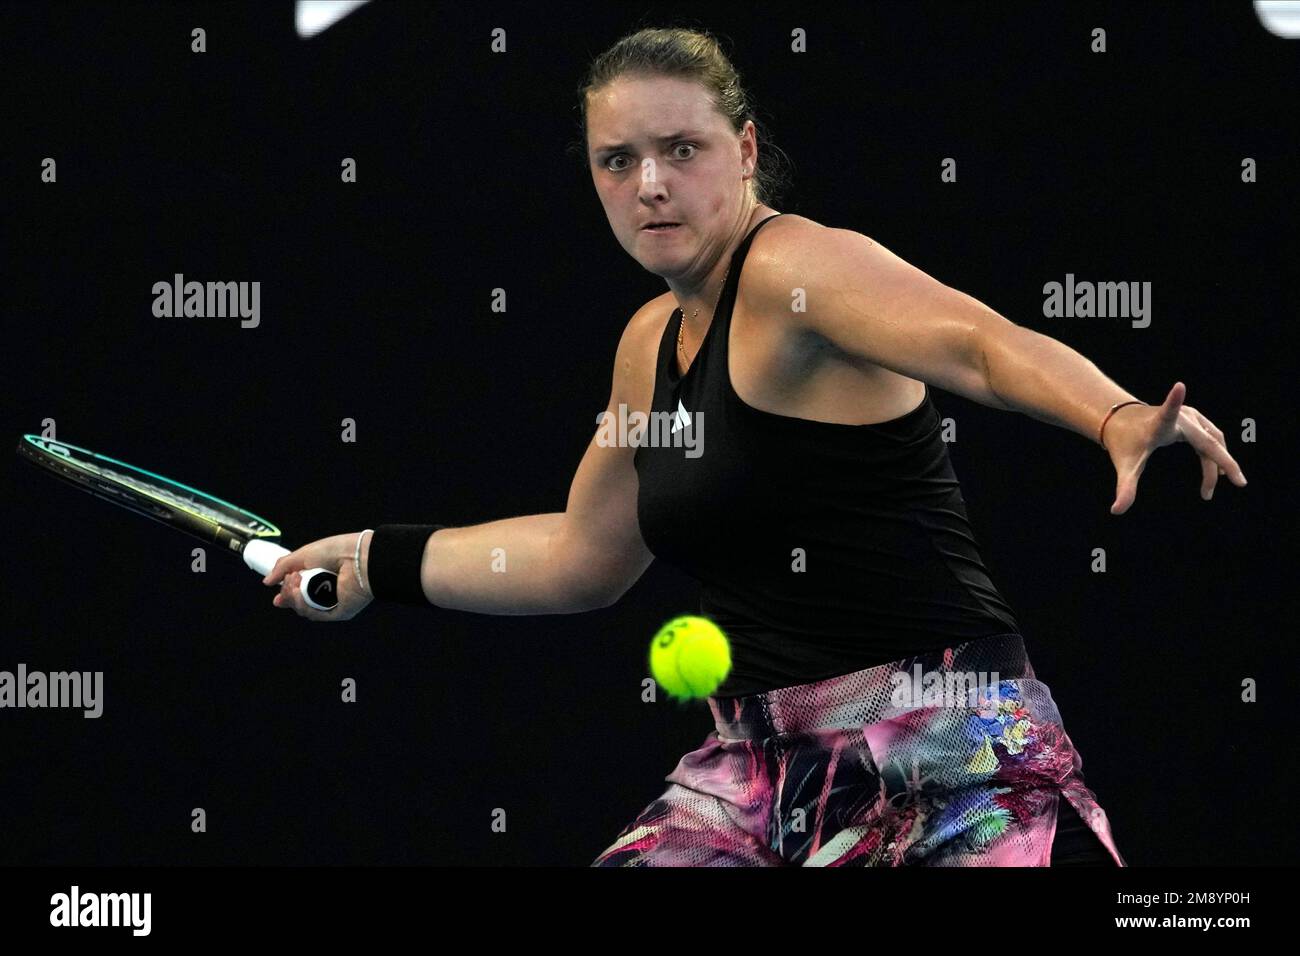 Jule Niemeier of Germany plays a forehand return to Iga Swiatek of Poland during their first round match at the Australian Open tennis championship in Melbourne, Australia, Monday, Jan